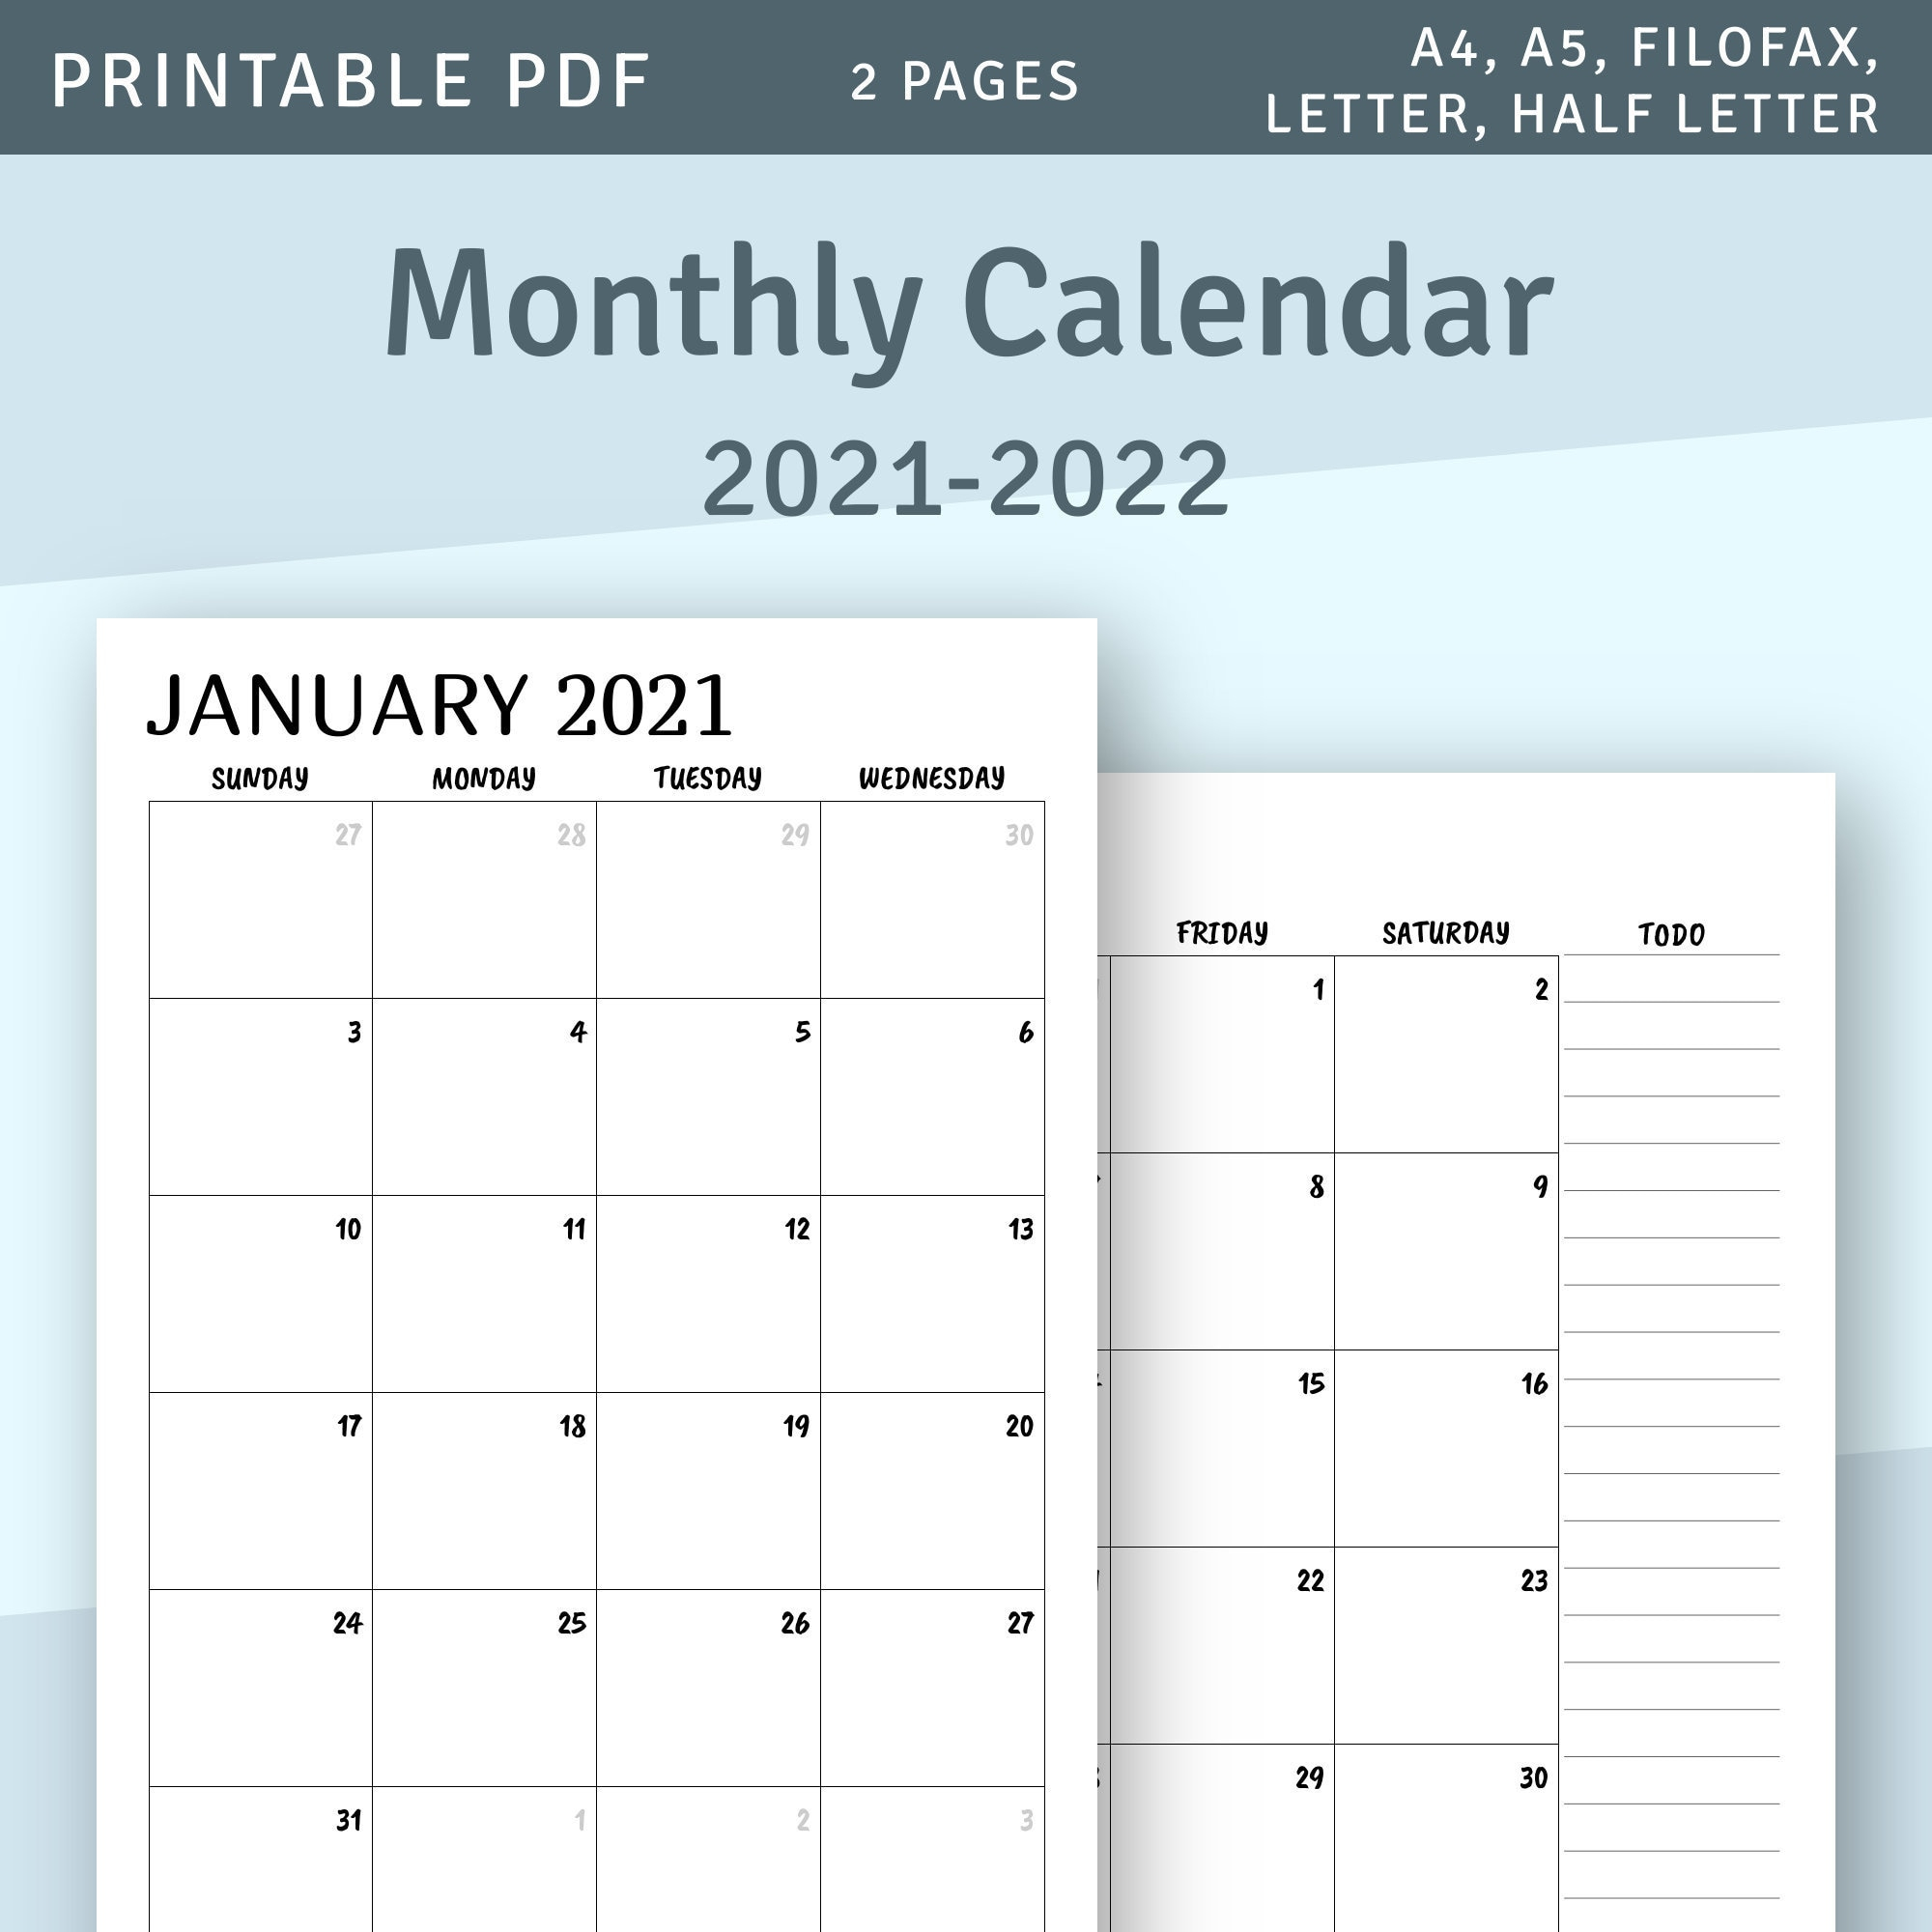 Printable Calendar Monthly 2021 2022 Month On Two Page | Etsy inside Free Printable Pocket Calendar Template